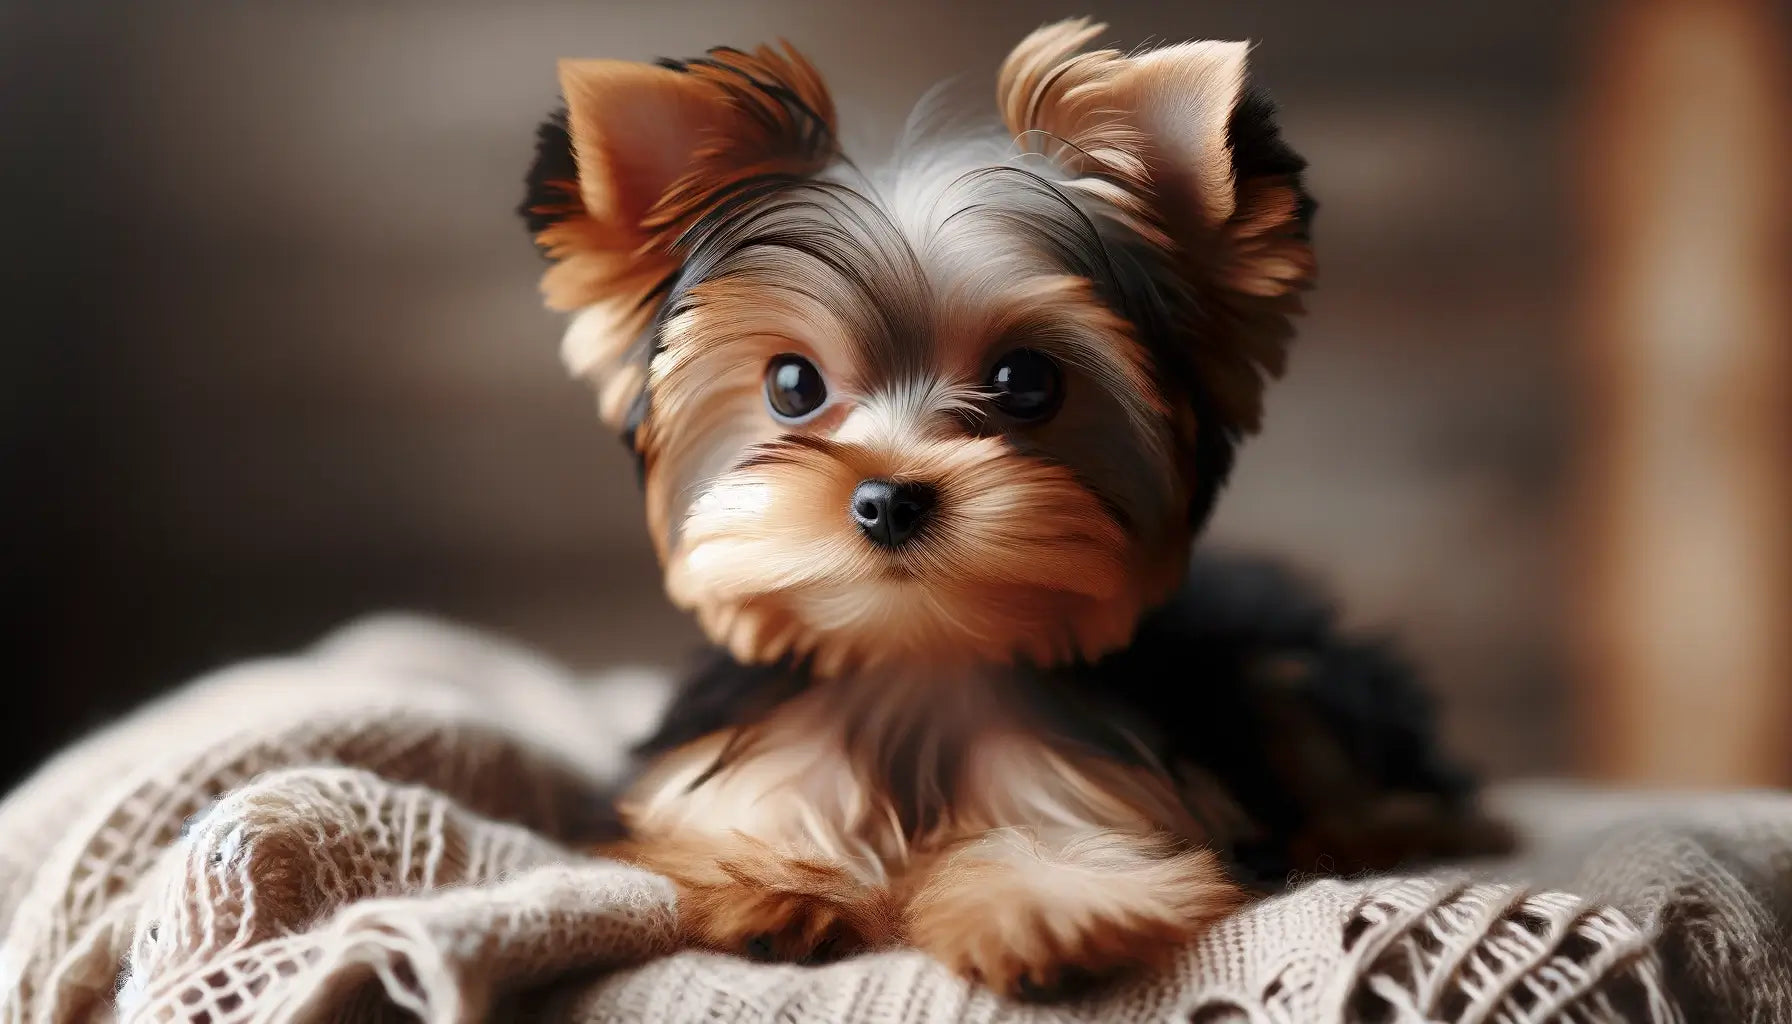 A Teacup Yorkie with a warm inquisitive gaze sits comfortably.